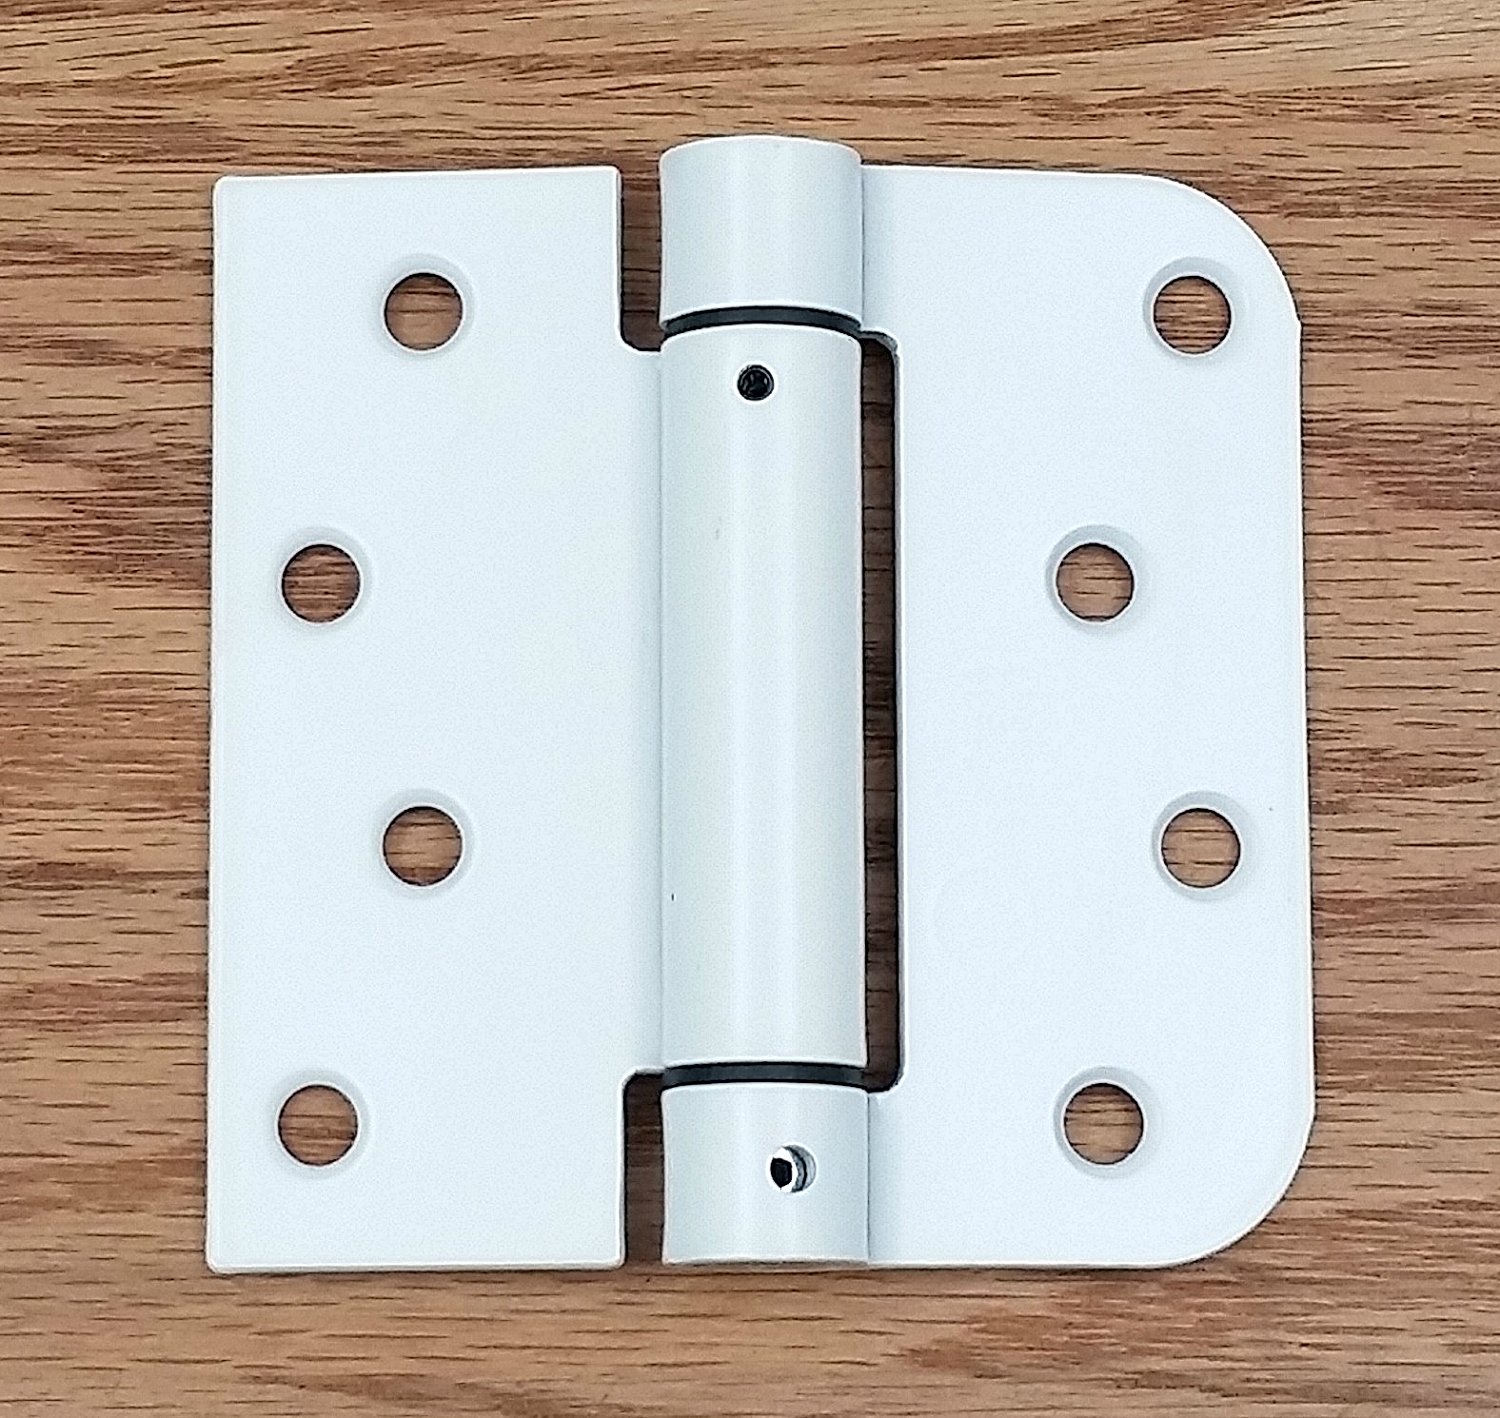 Spring Self-Closing Hinges, 4" X 4" Square with 5/8" White Prime - 2 Pack - Adjustable Door Closing - image 1 of 2